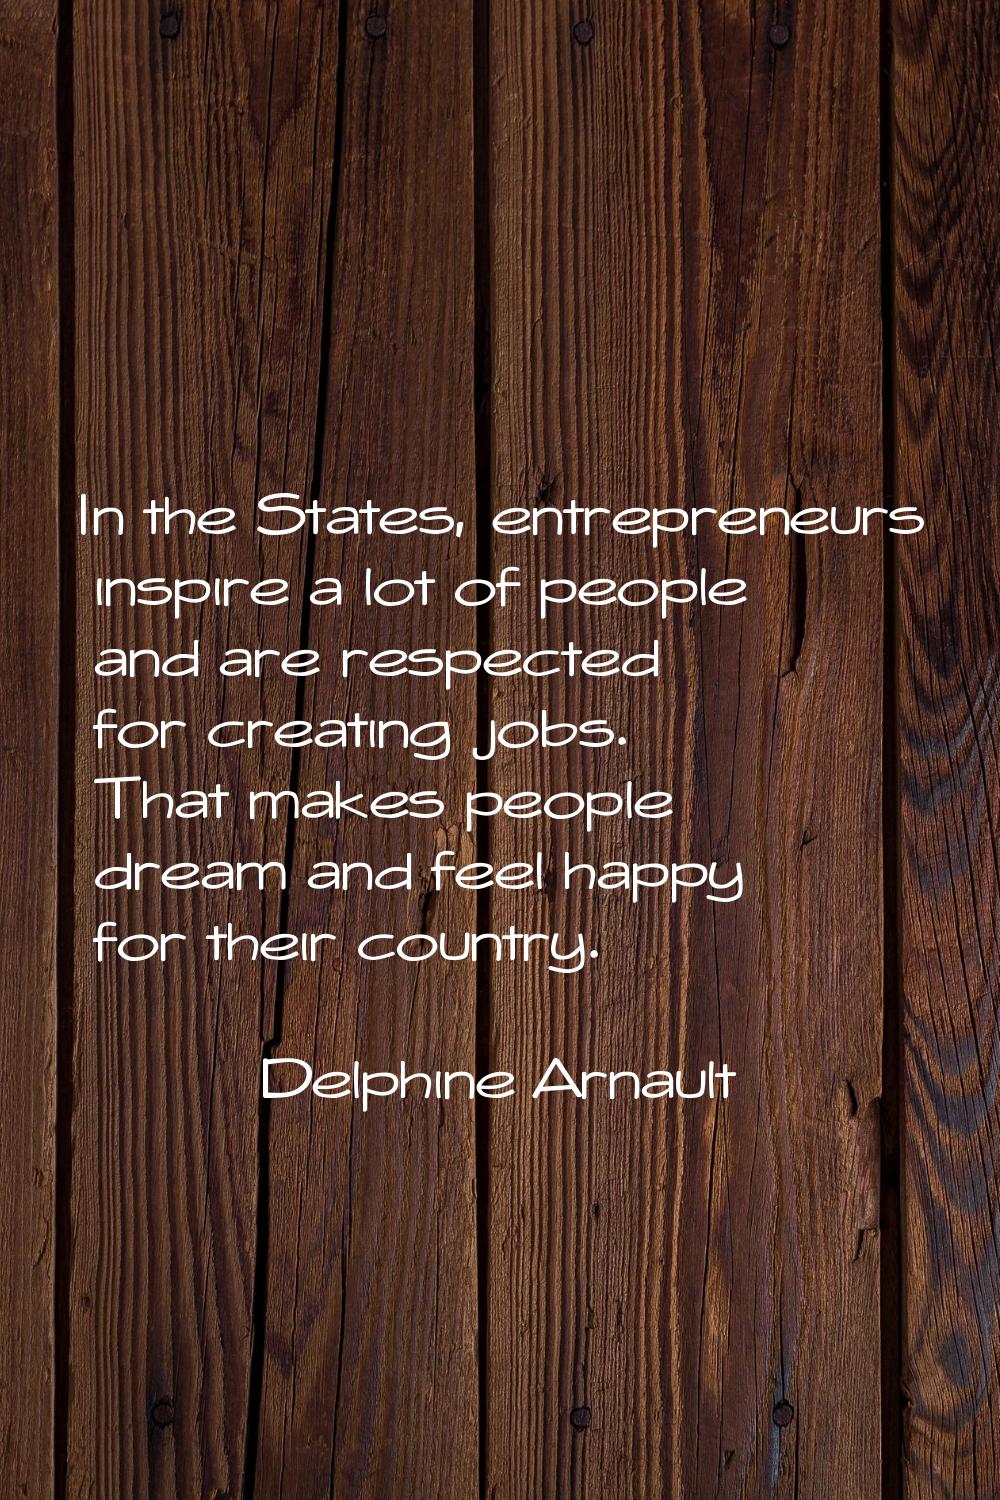 In the States, entrepreneurs inspire a lot of people and are respected for creating jobs. That make